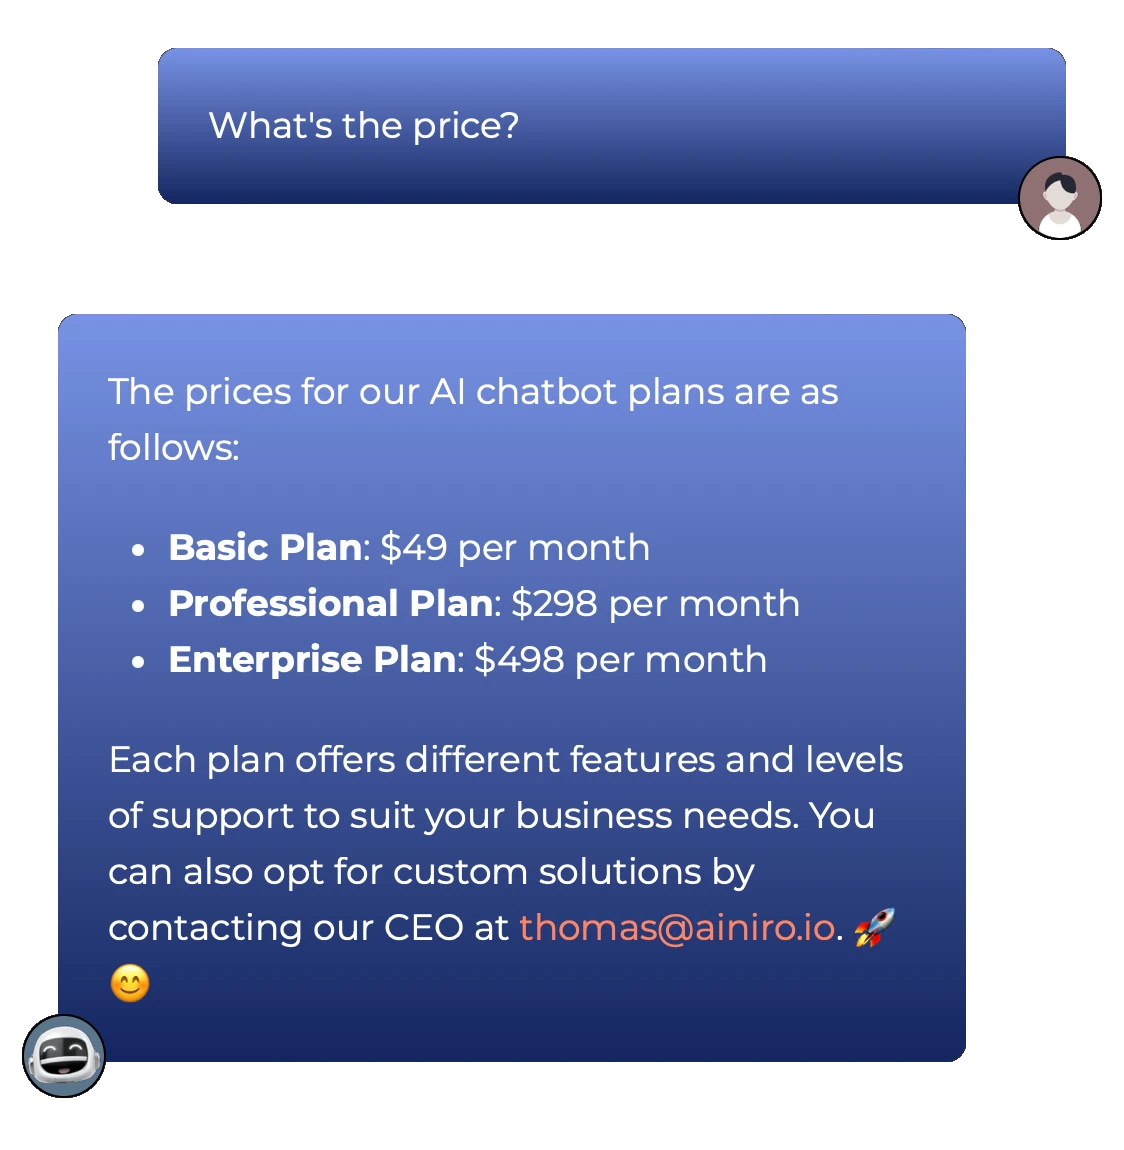 Our AI chatbot embedded on our website answering questions about price to help sell